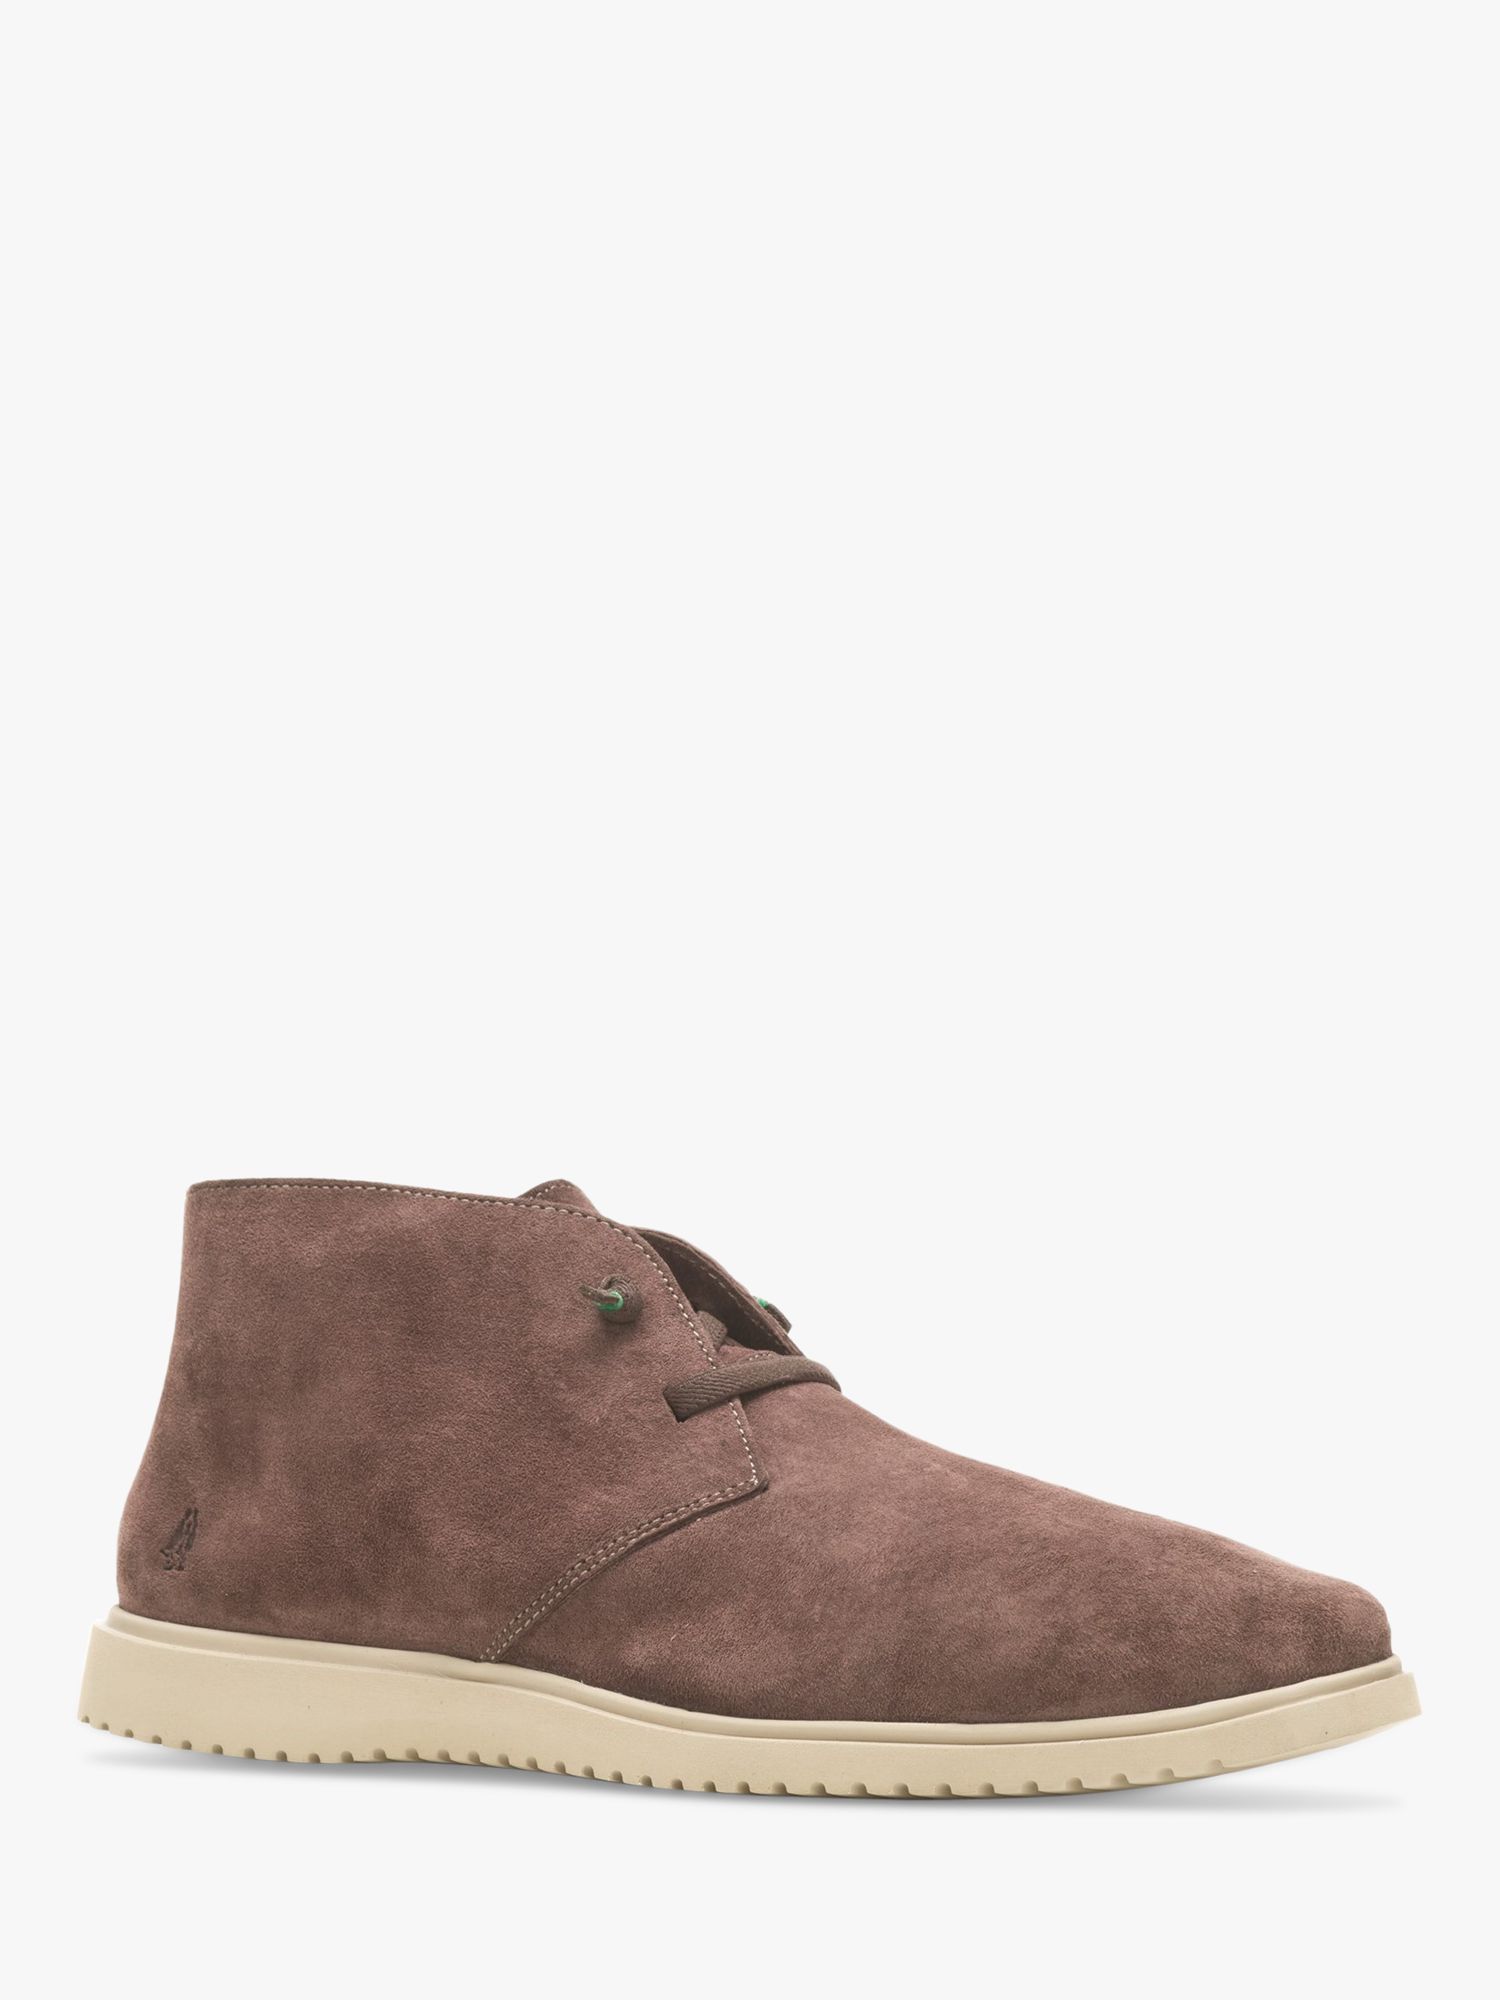 Hush Puppies Everyday Suede Leather Chukka Boots, Brown at John Lewis ...